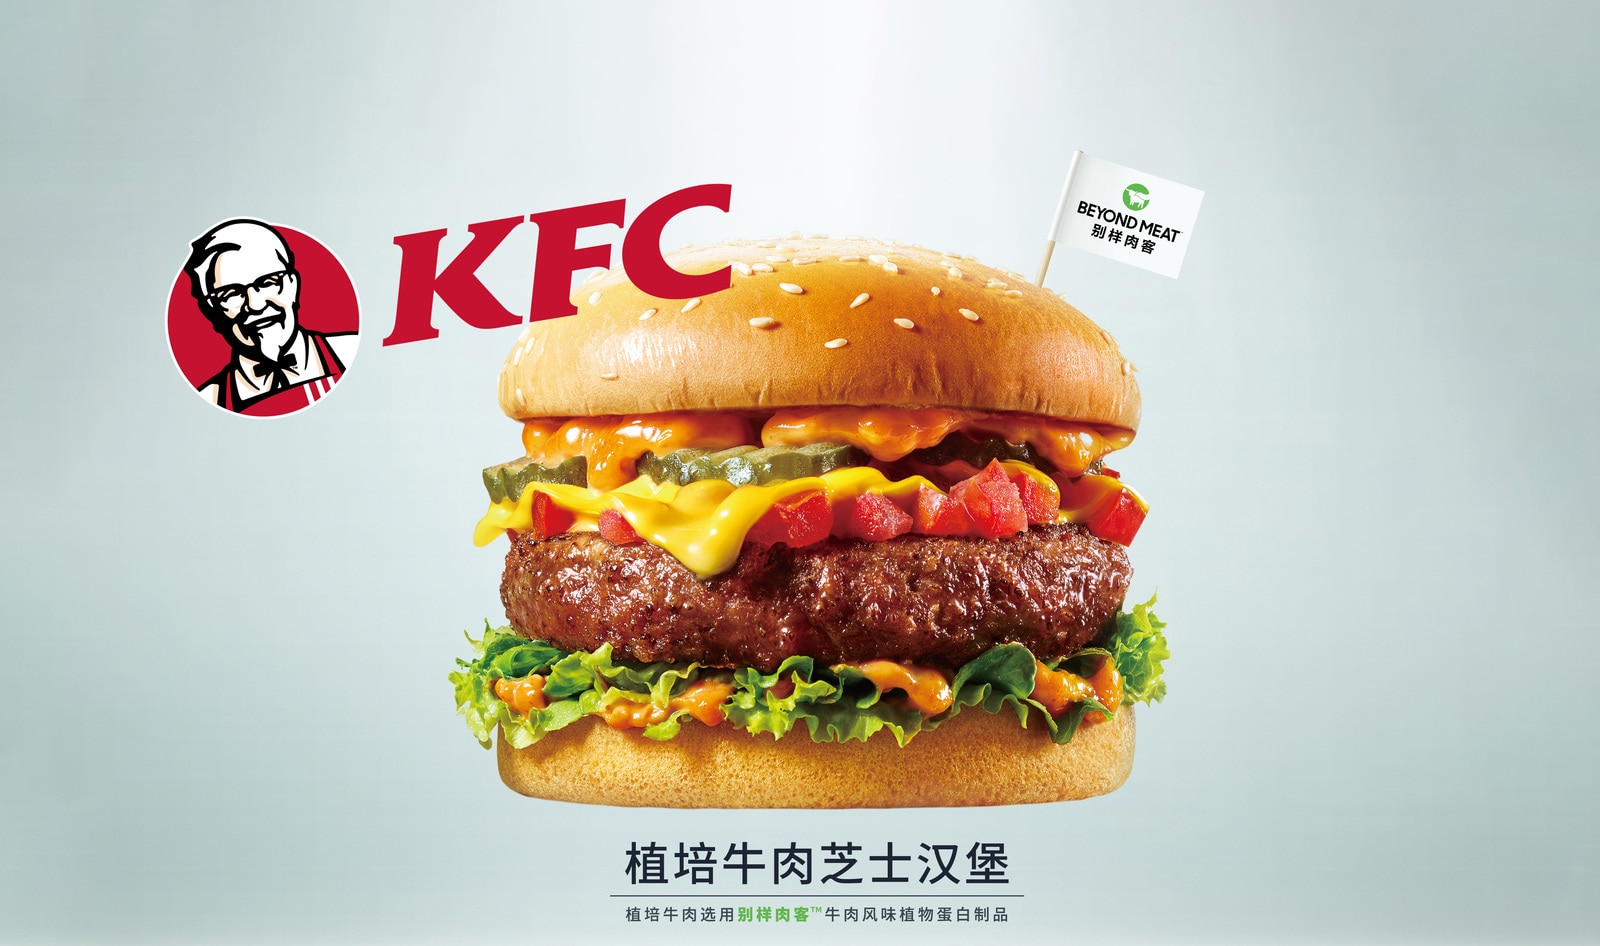 Beyond Burger Expands to 210 KFC Locations Across China